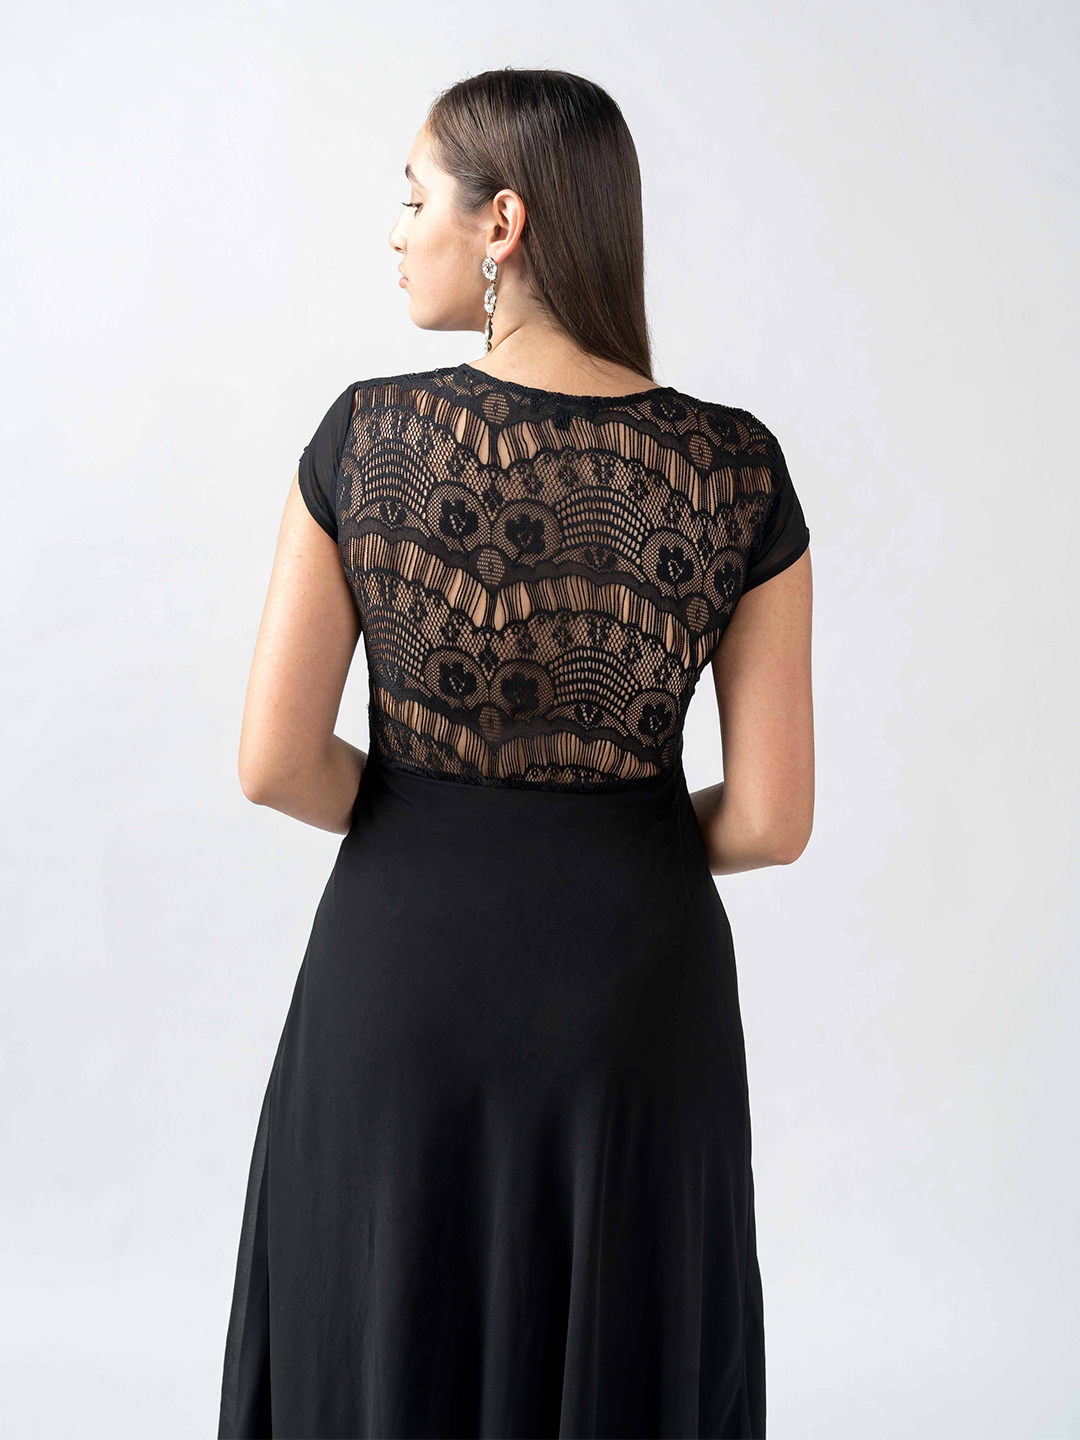 Lace gown dress -4